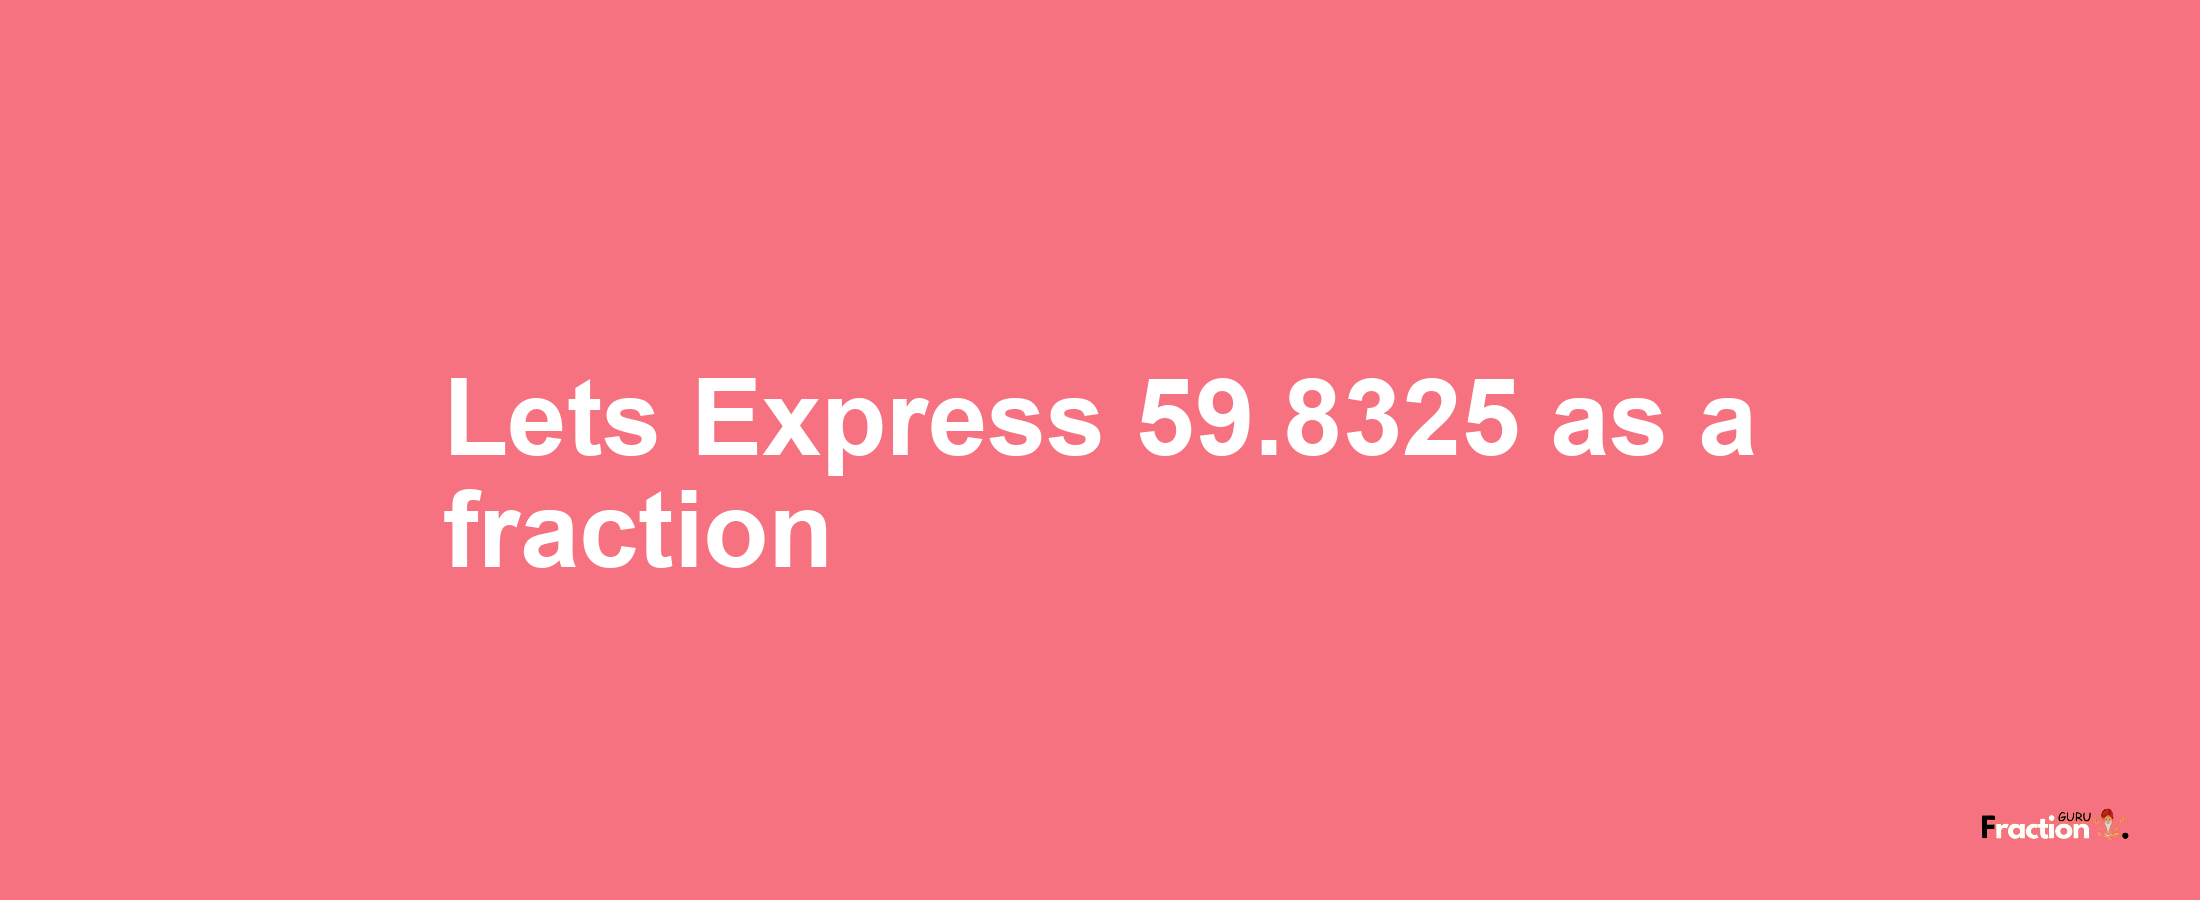 Lets Express 59.8325 as afraction